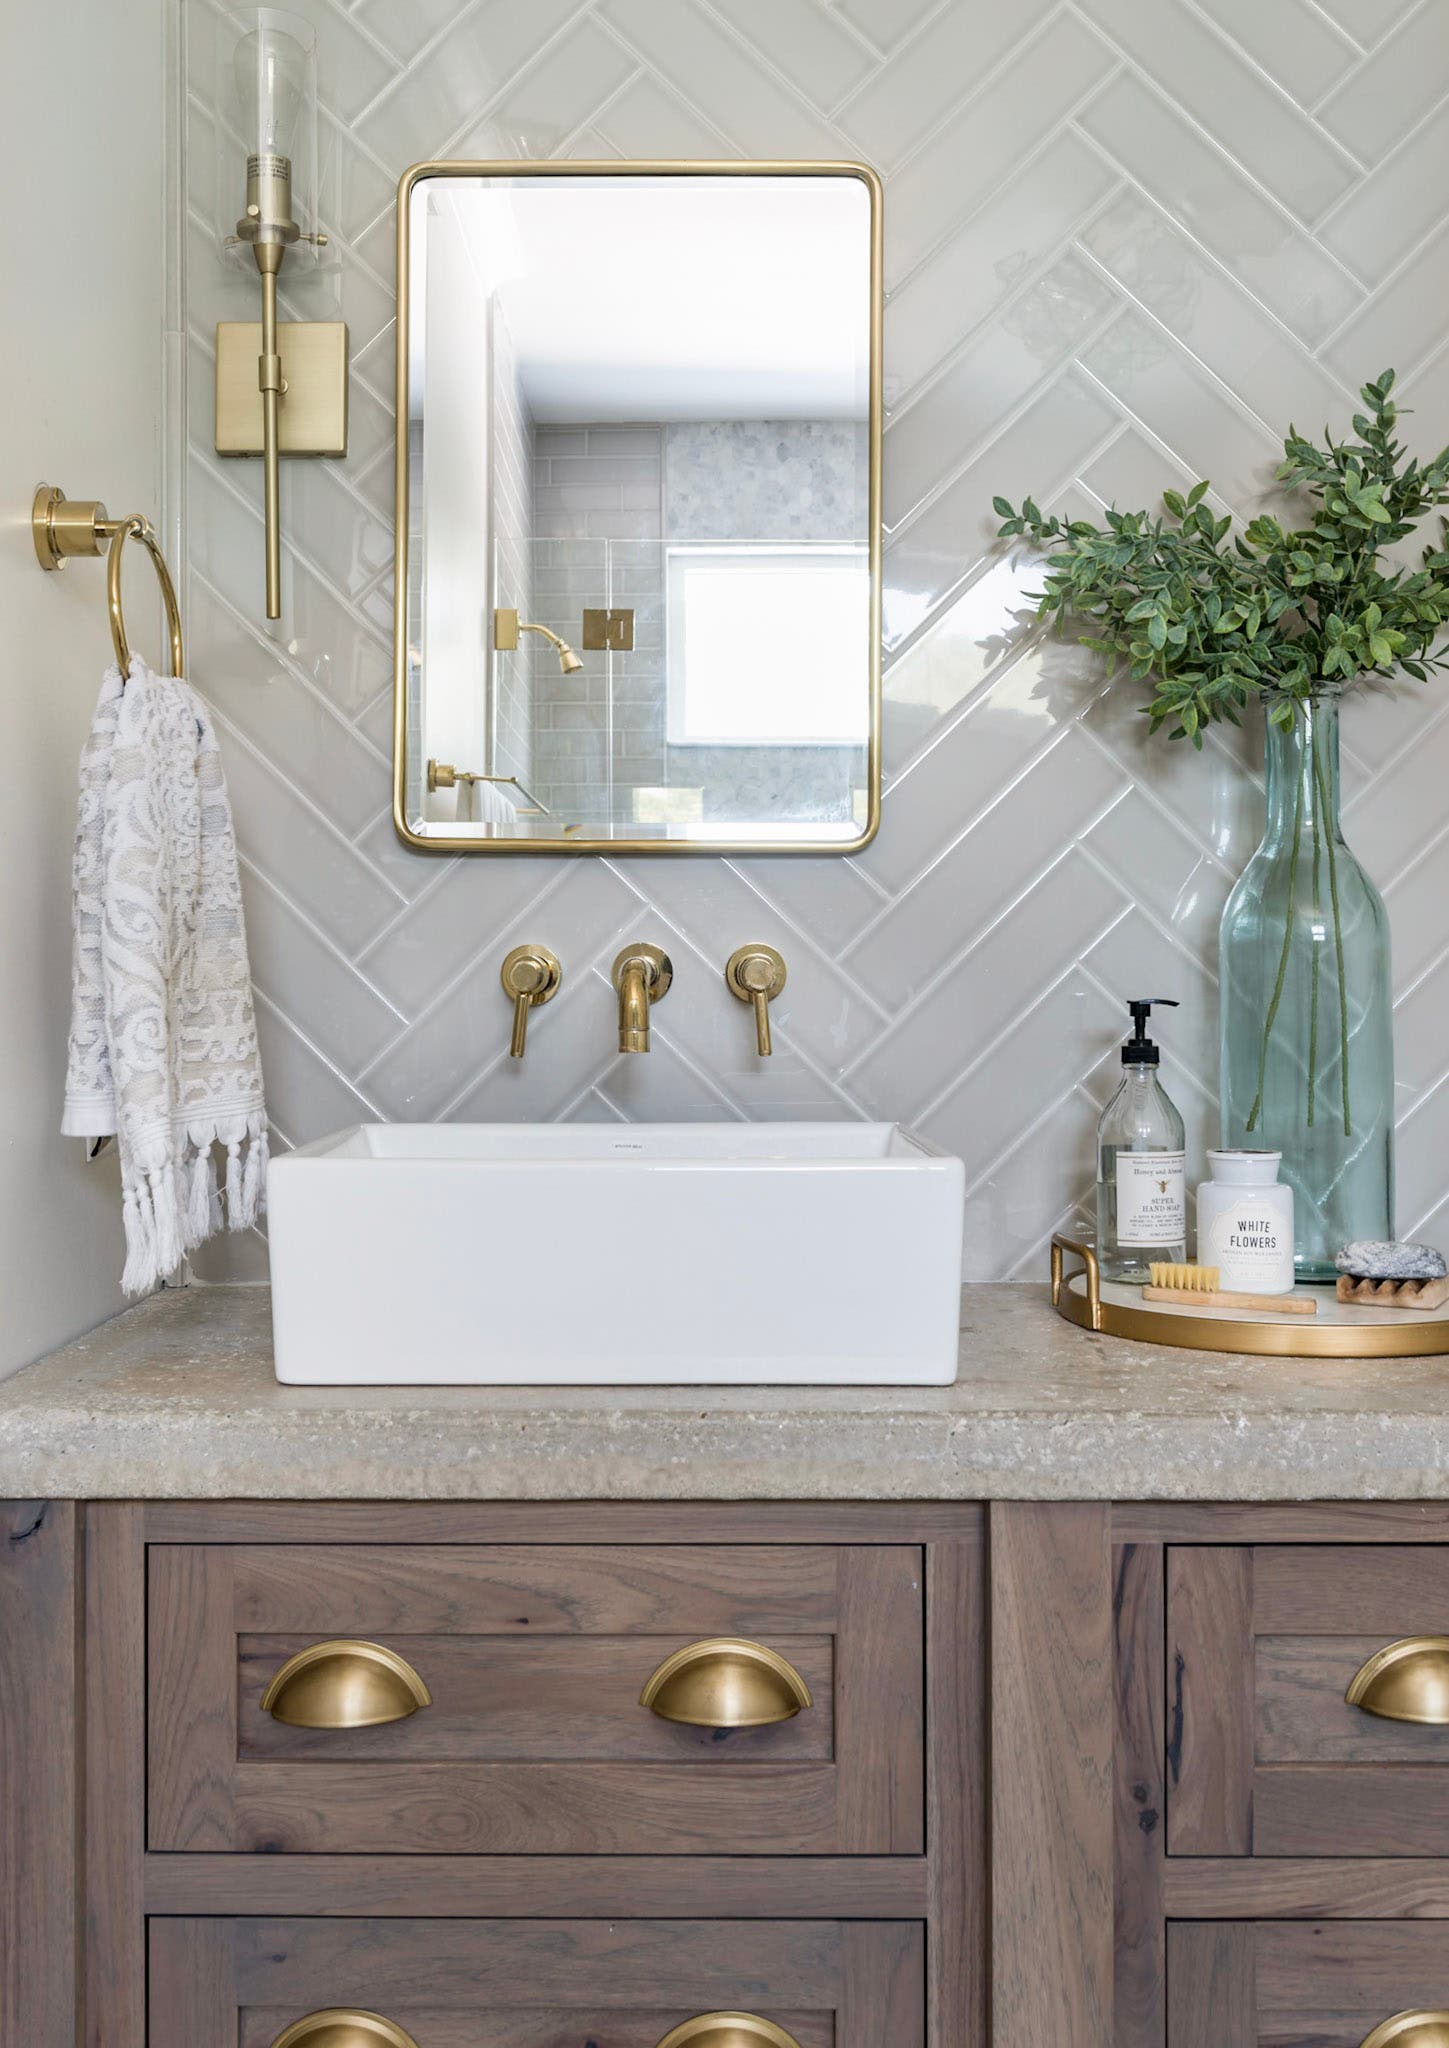 Should You Buy a Vessel Sink for Your Bathroom?